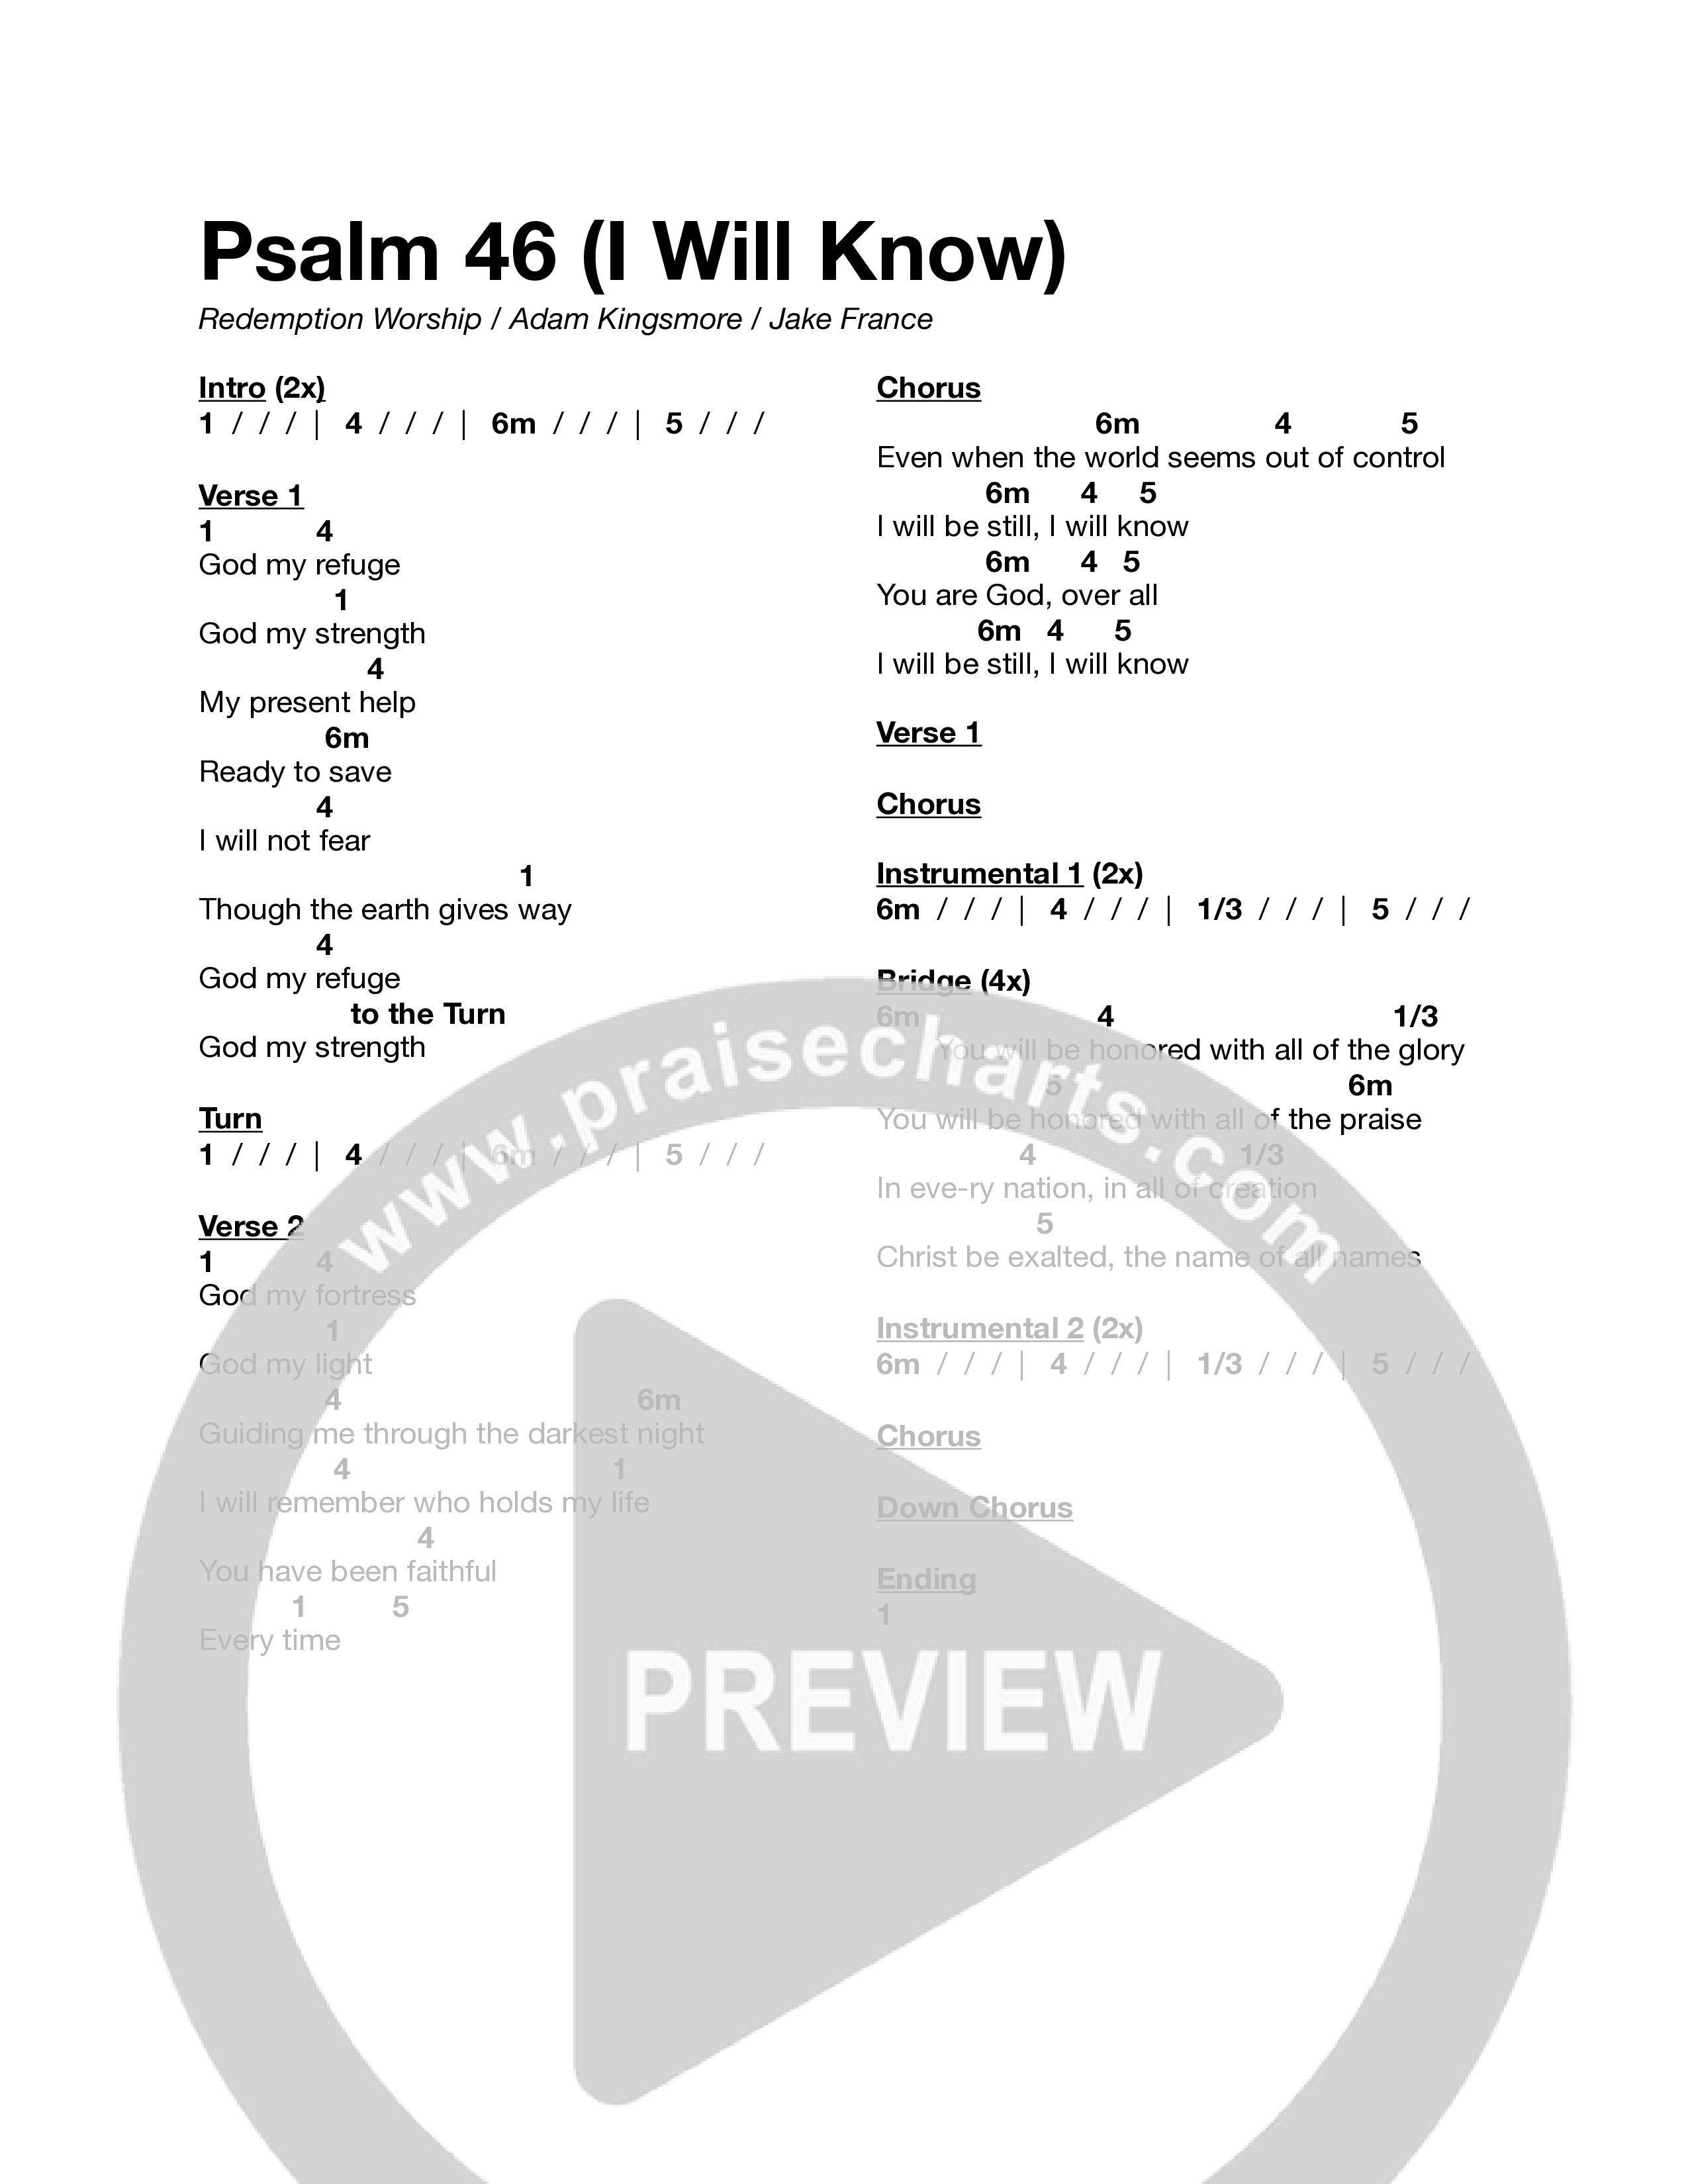 Psalm 46 (I Will Know) Chord Chart (Redemption Worship)